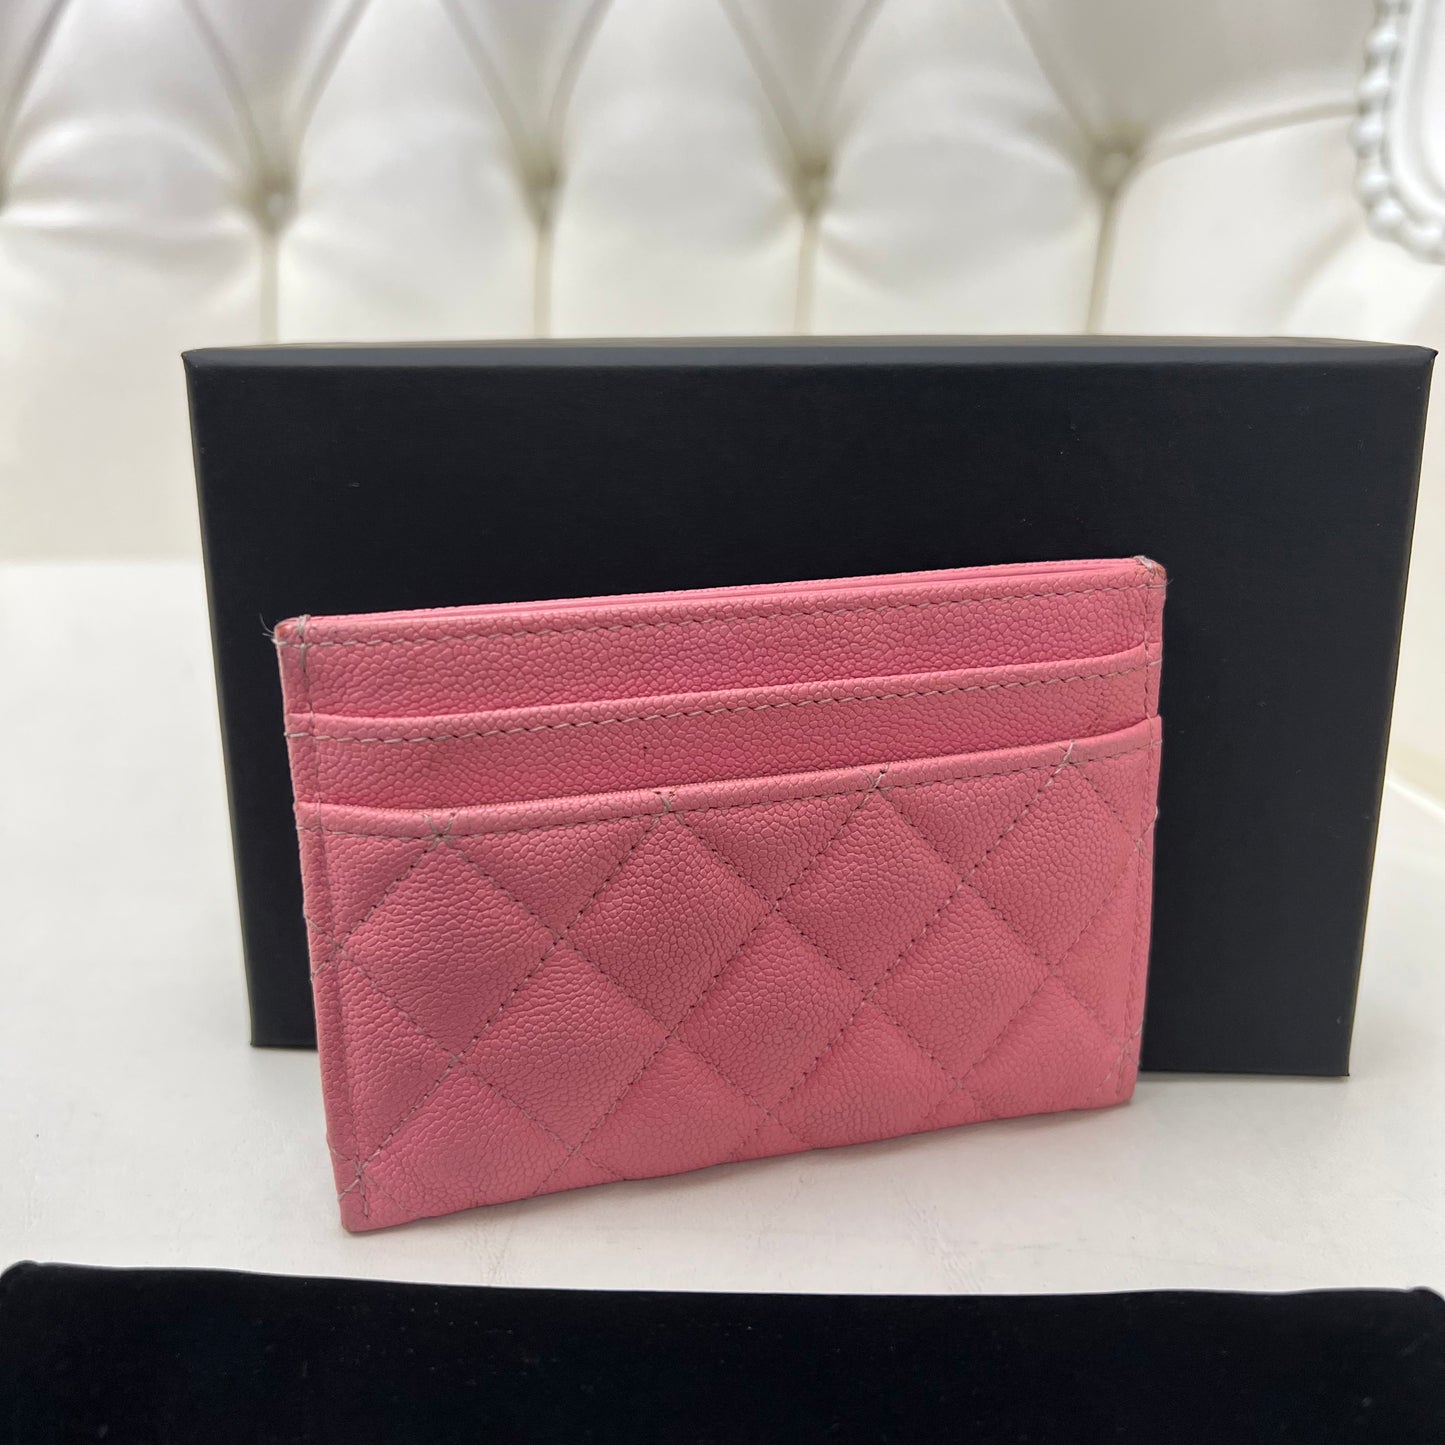 Chanel Caviar Quilted Boy Card Case